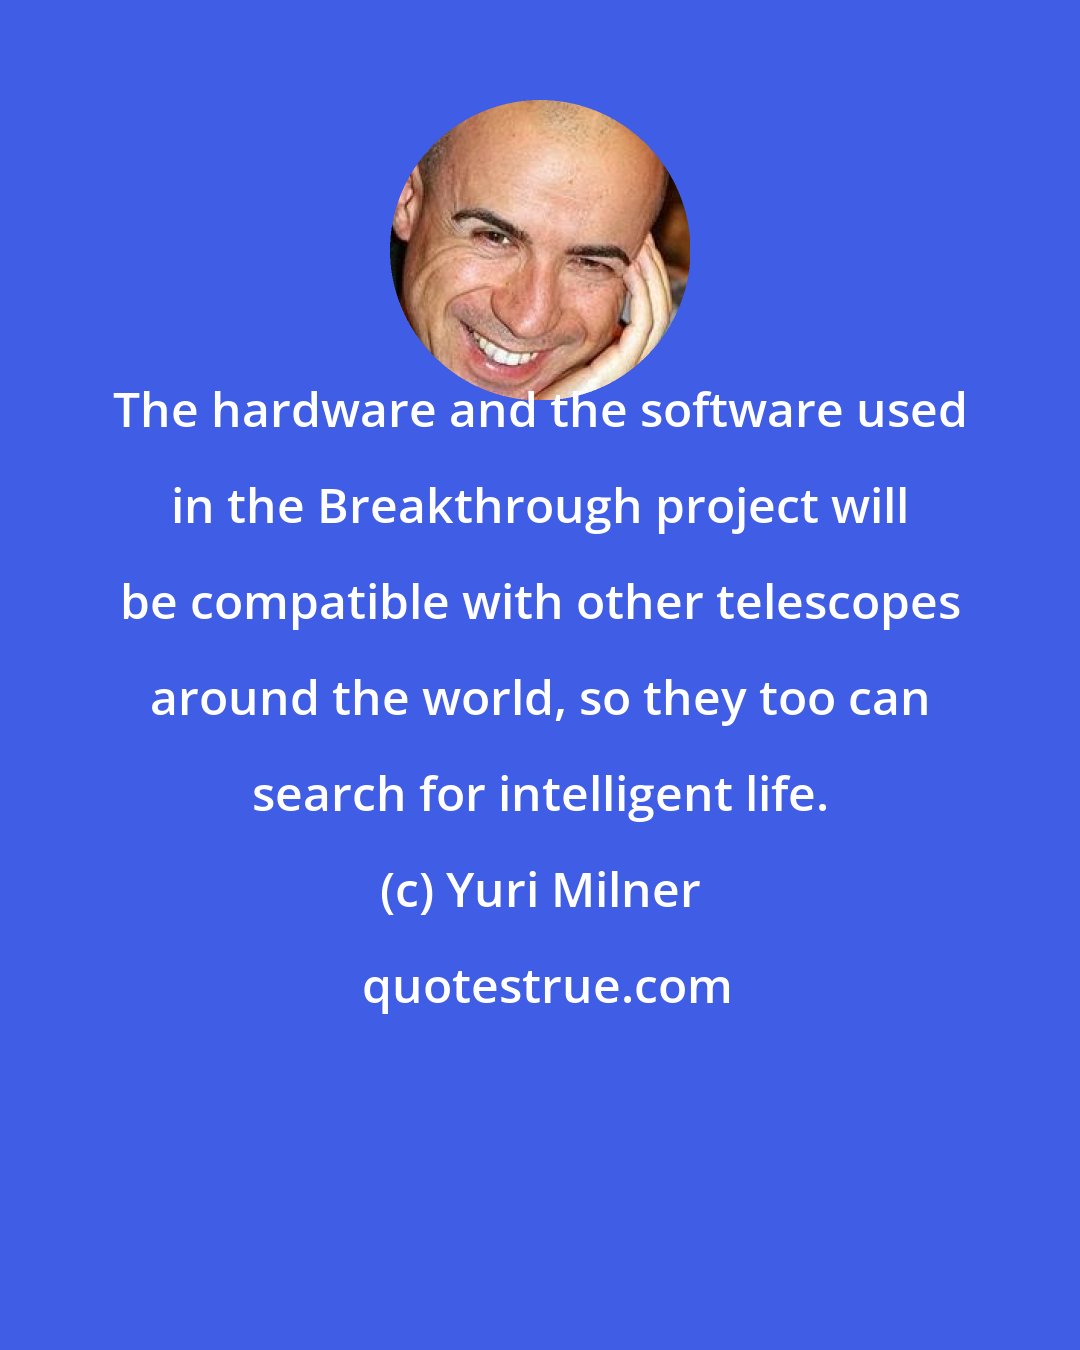 Yuri Milner: The hardware and the software used in the Breakthrough project will be compatible with other telescopes around the world, so they too can search for intelligent life.